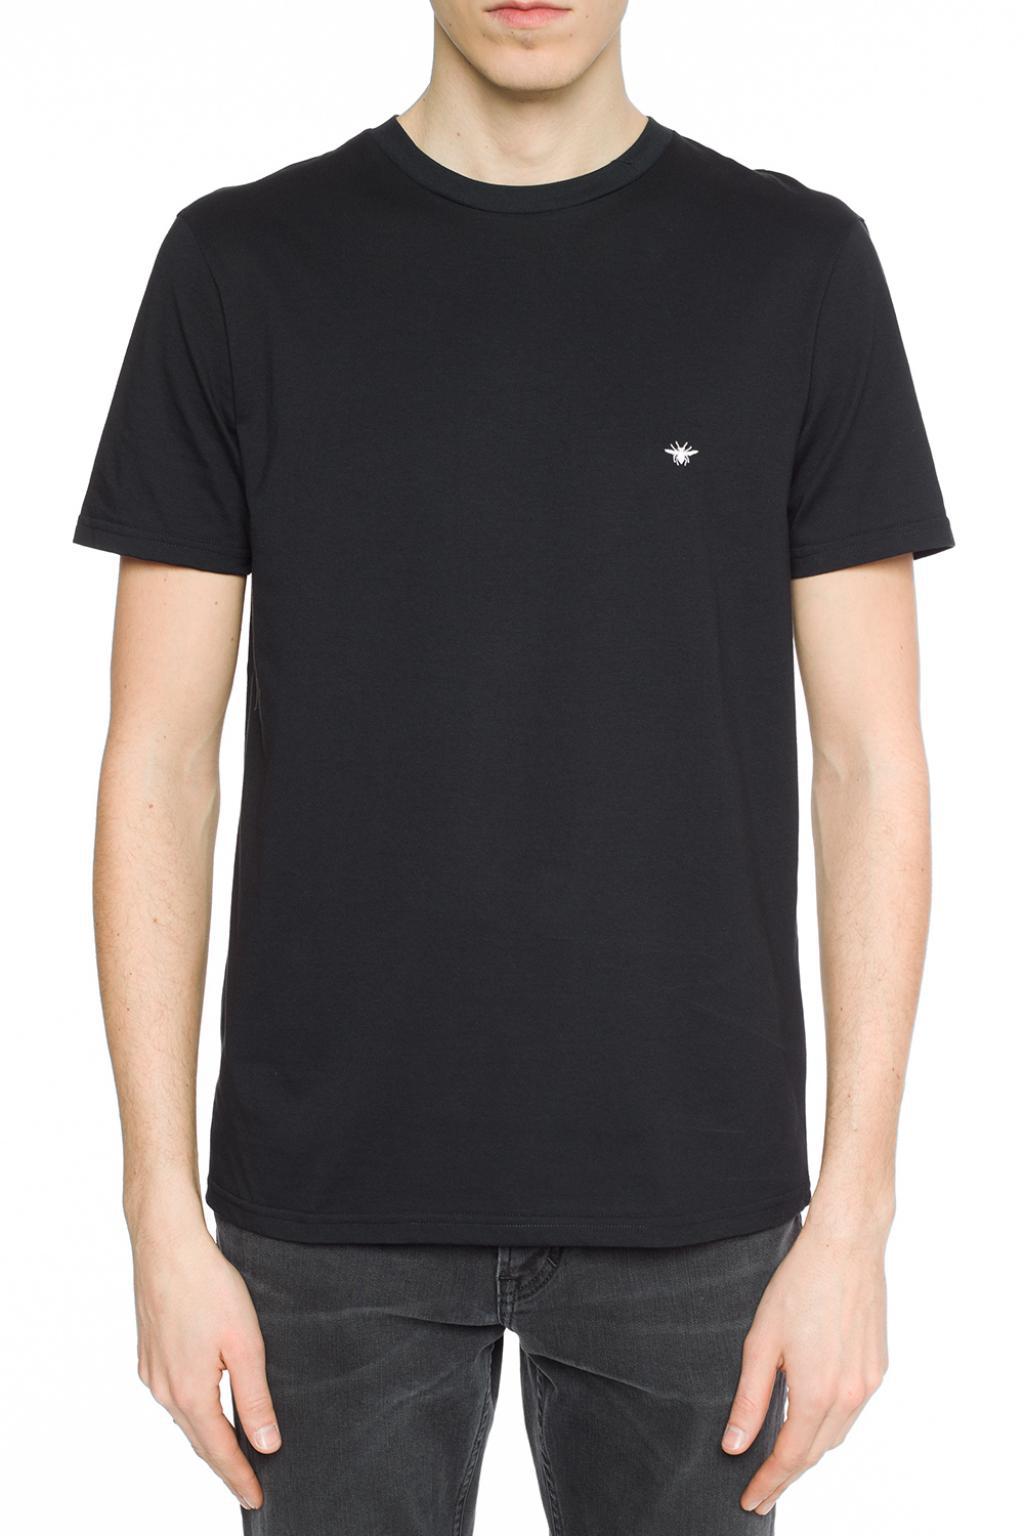 Dior Cotton Embroidered T-shirt in Black for Men - Lyst